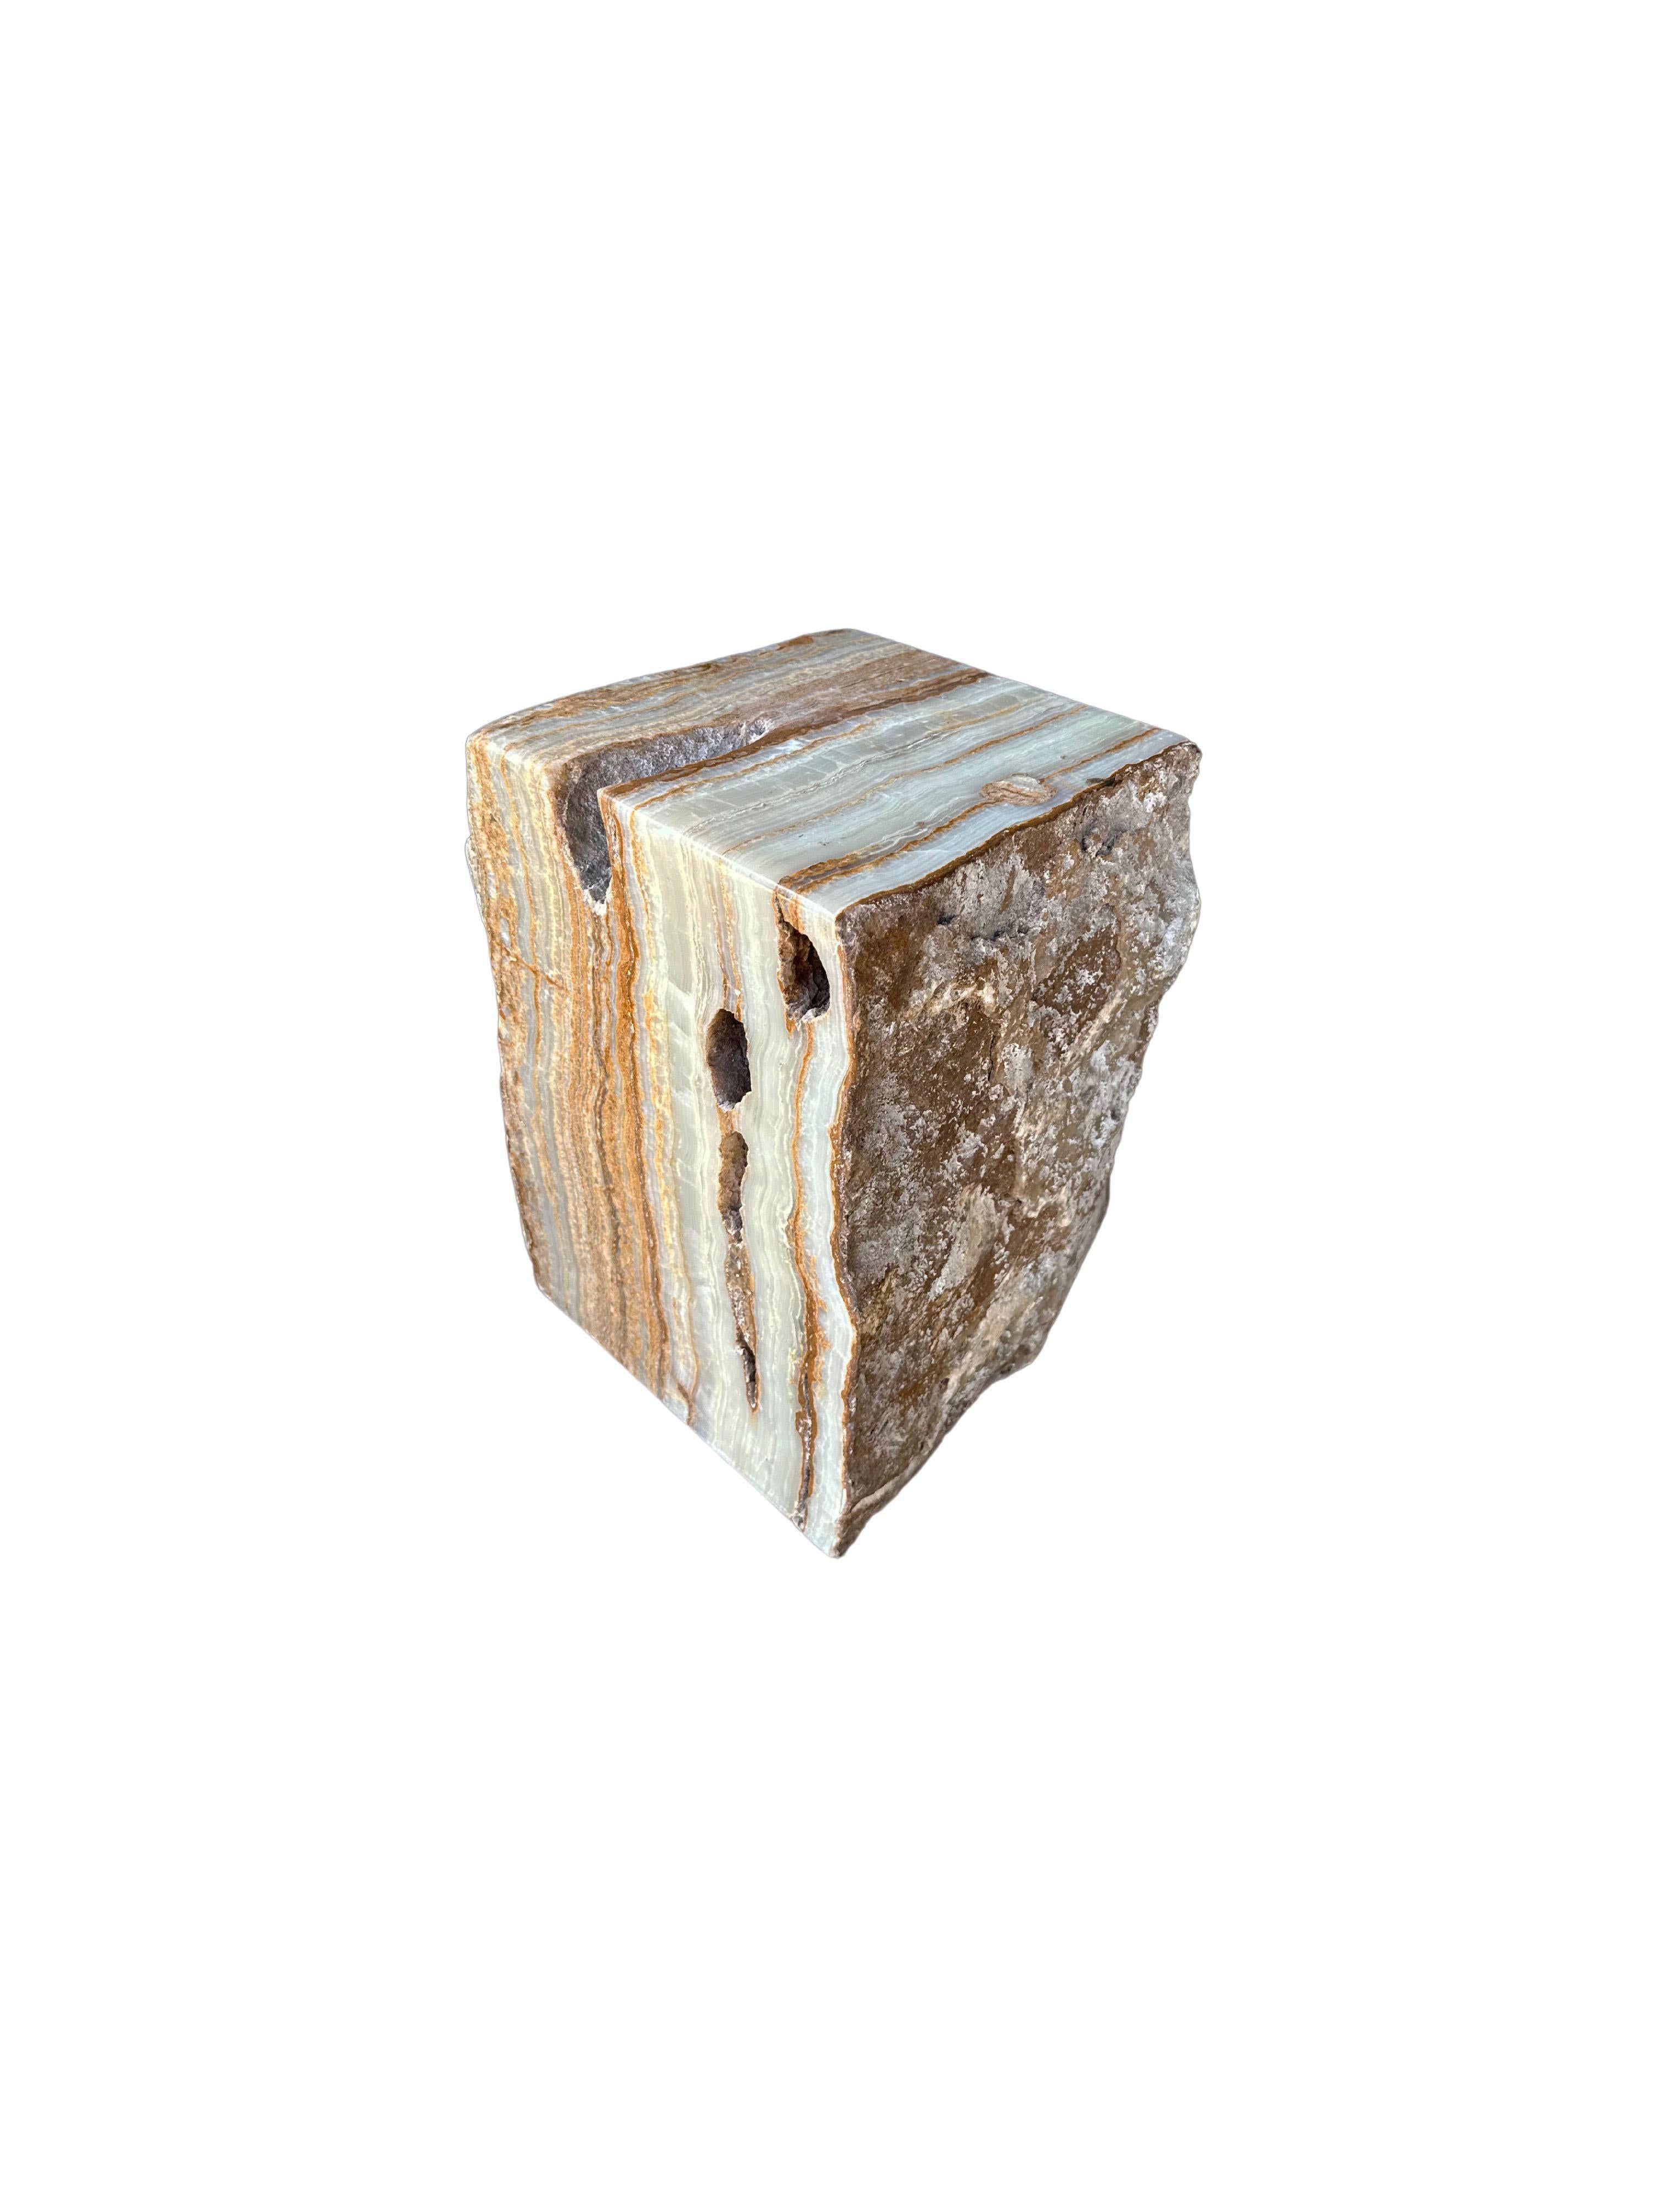 A Jupiter onyx solid marble block which serves as a wonderful side table or pedestal. Sourced on the island of Sumatra with earthy & jade green undertones, this raw and organic object features a stunning mix of textures and shades. The mix of smooth